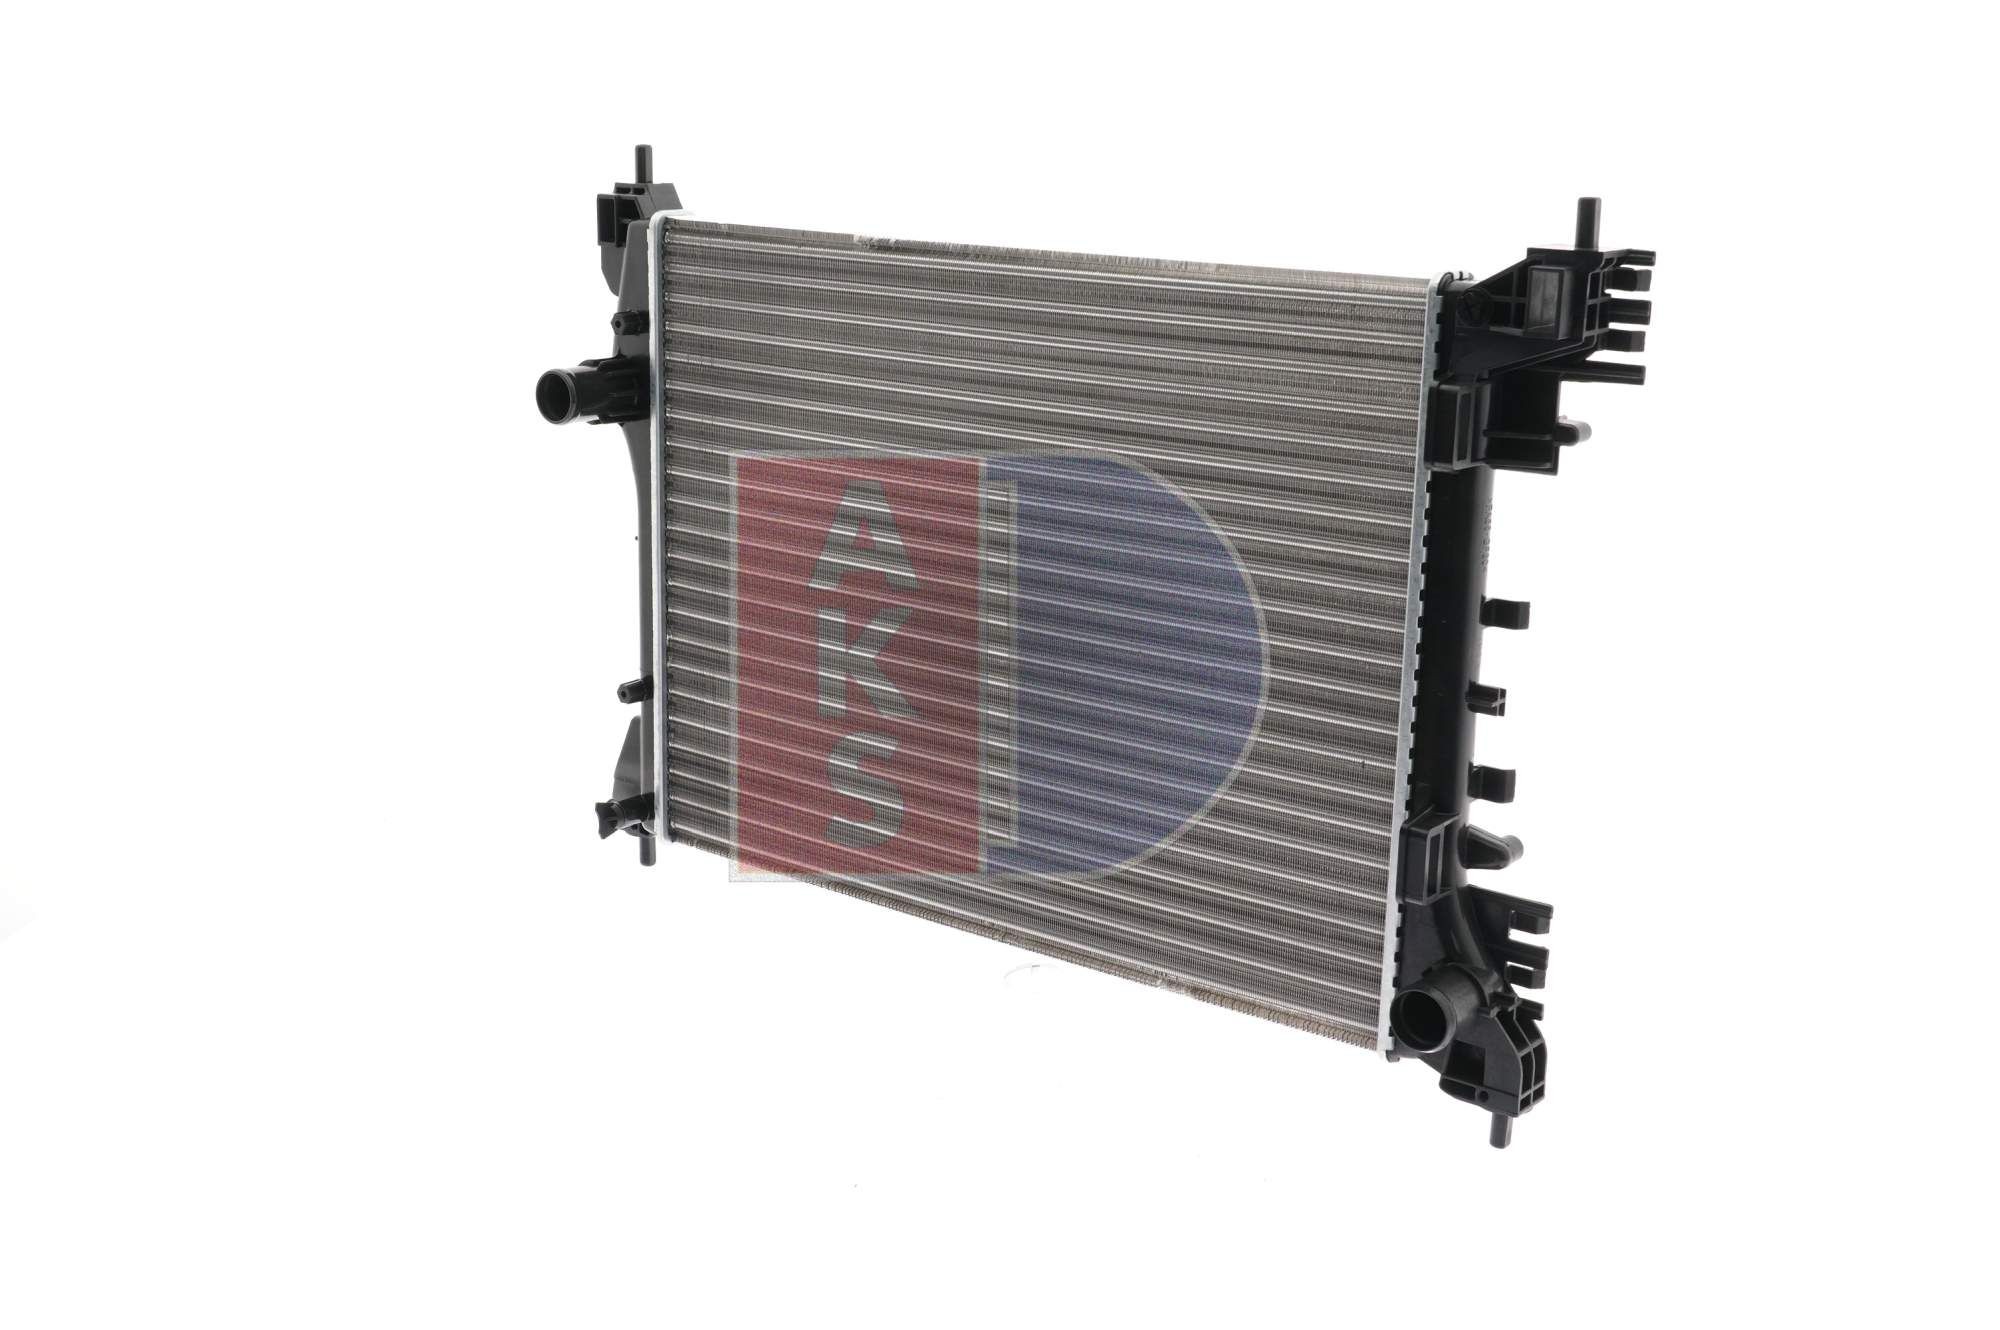 010001N Radiator 010001N AKS DASIS for vehicles with/without air conditioning, 580 x 415 x 34 mm, Manual Transmission, Mechanically jointed cooling fins